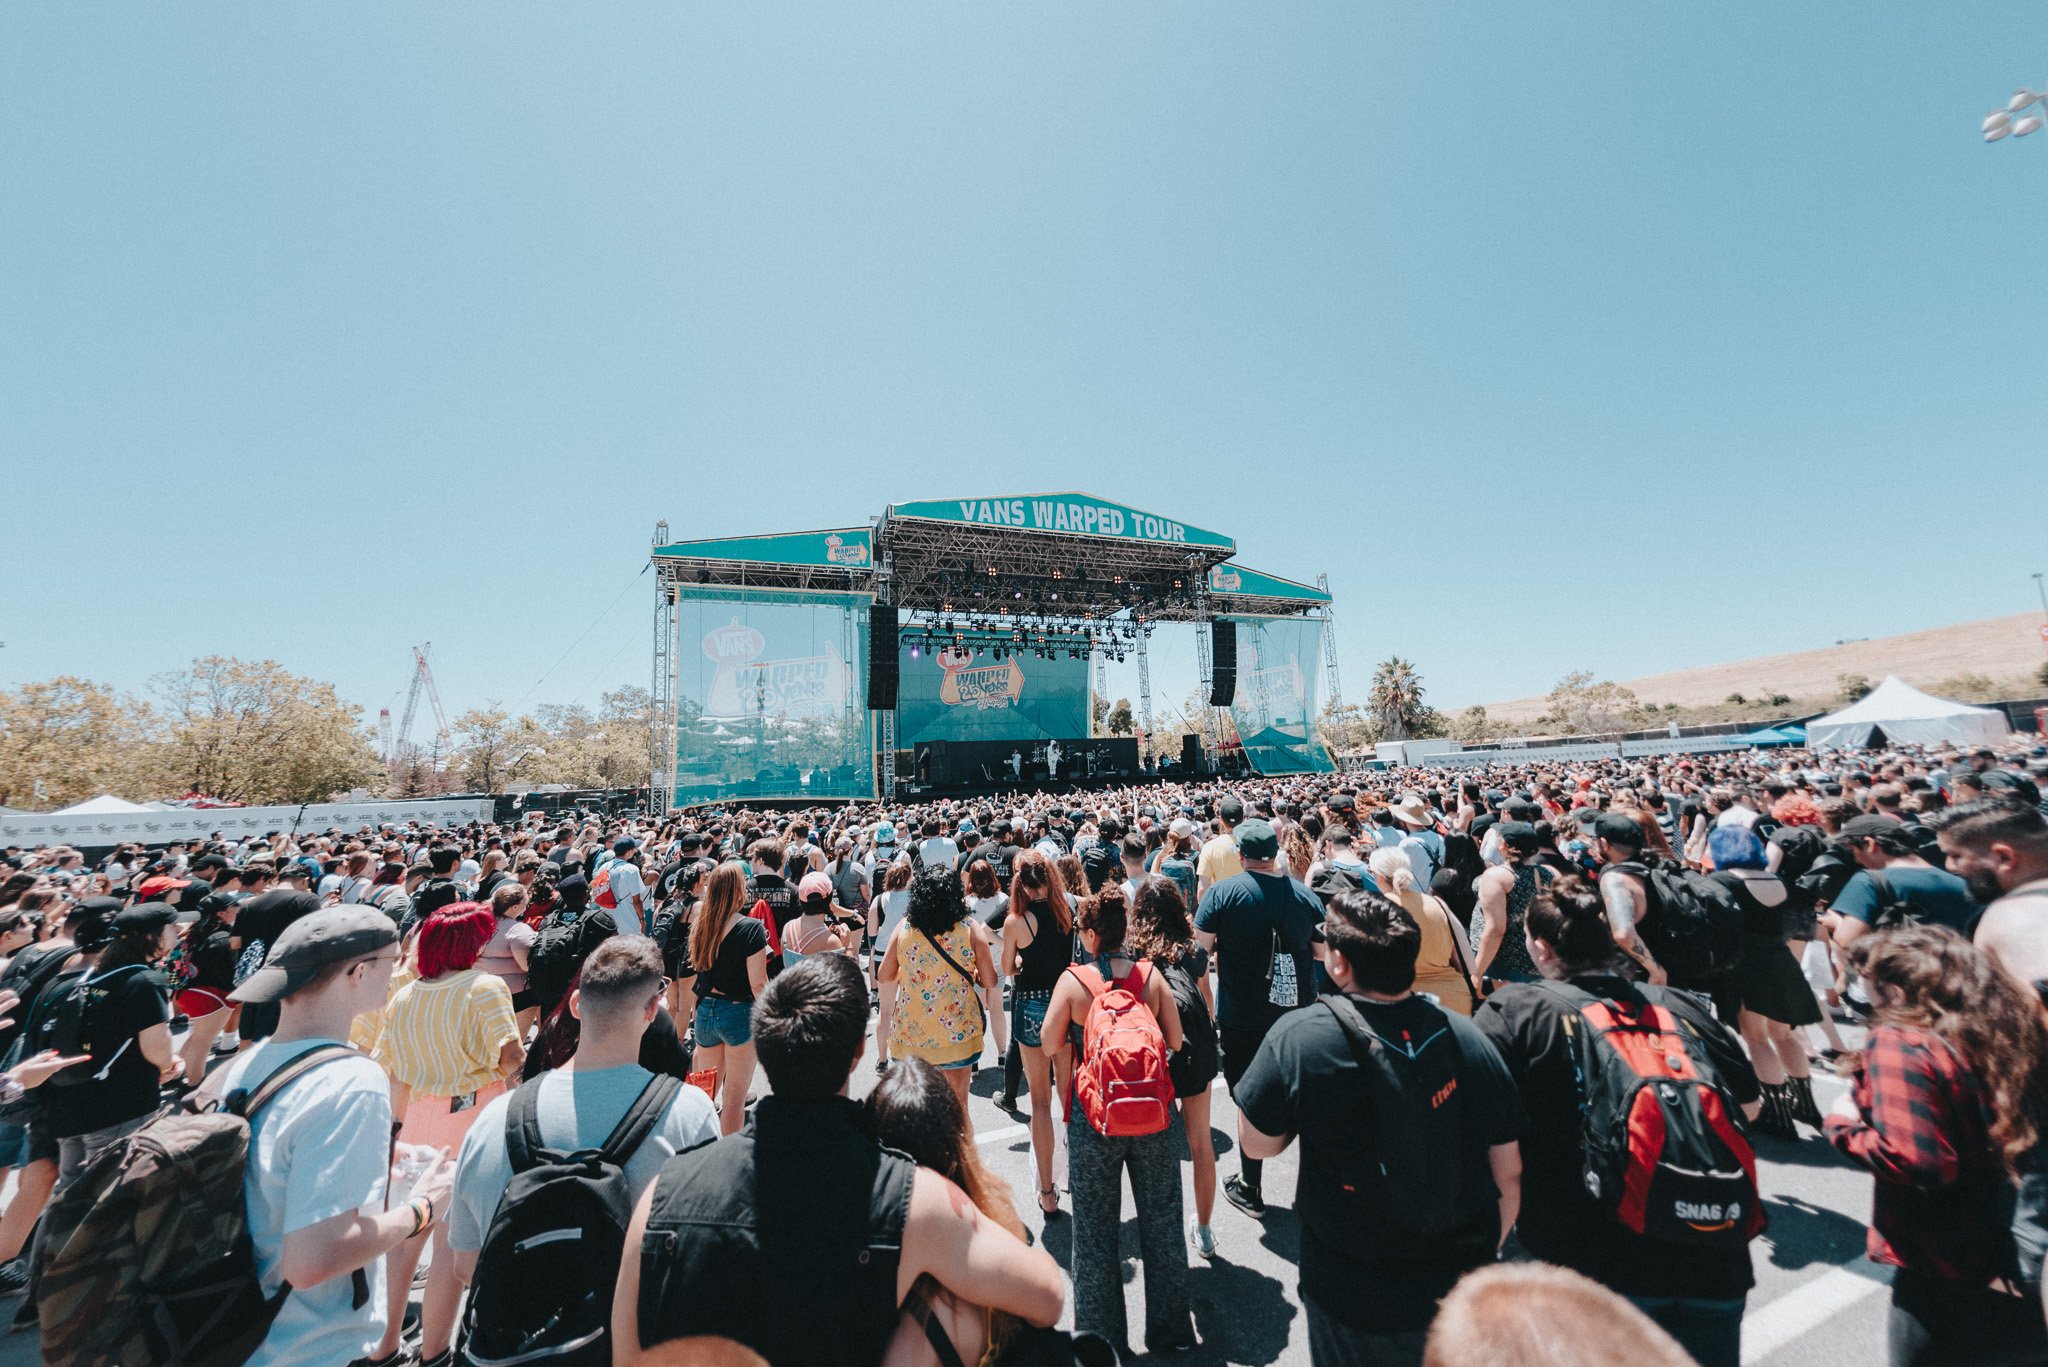 Vans Warped Tour on Twitter: "STAGE INFO The Vans "Off The Wall" Stage is 1  stage that rotates every time a new band plays. don't go looking for 2  stages! 📸 @anammerch #